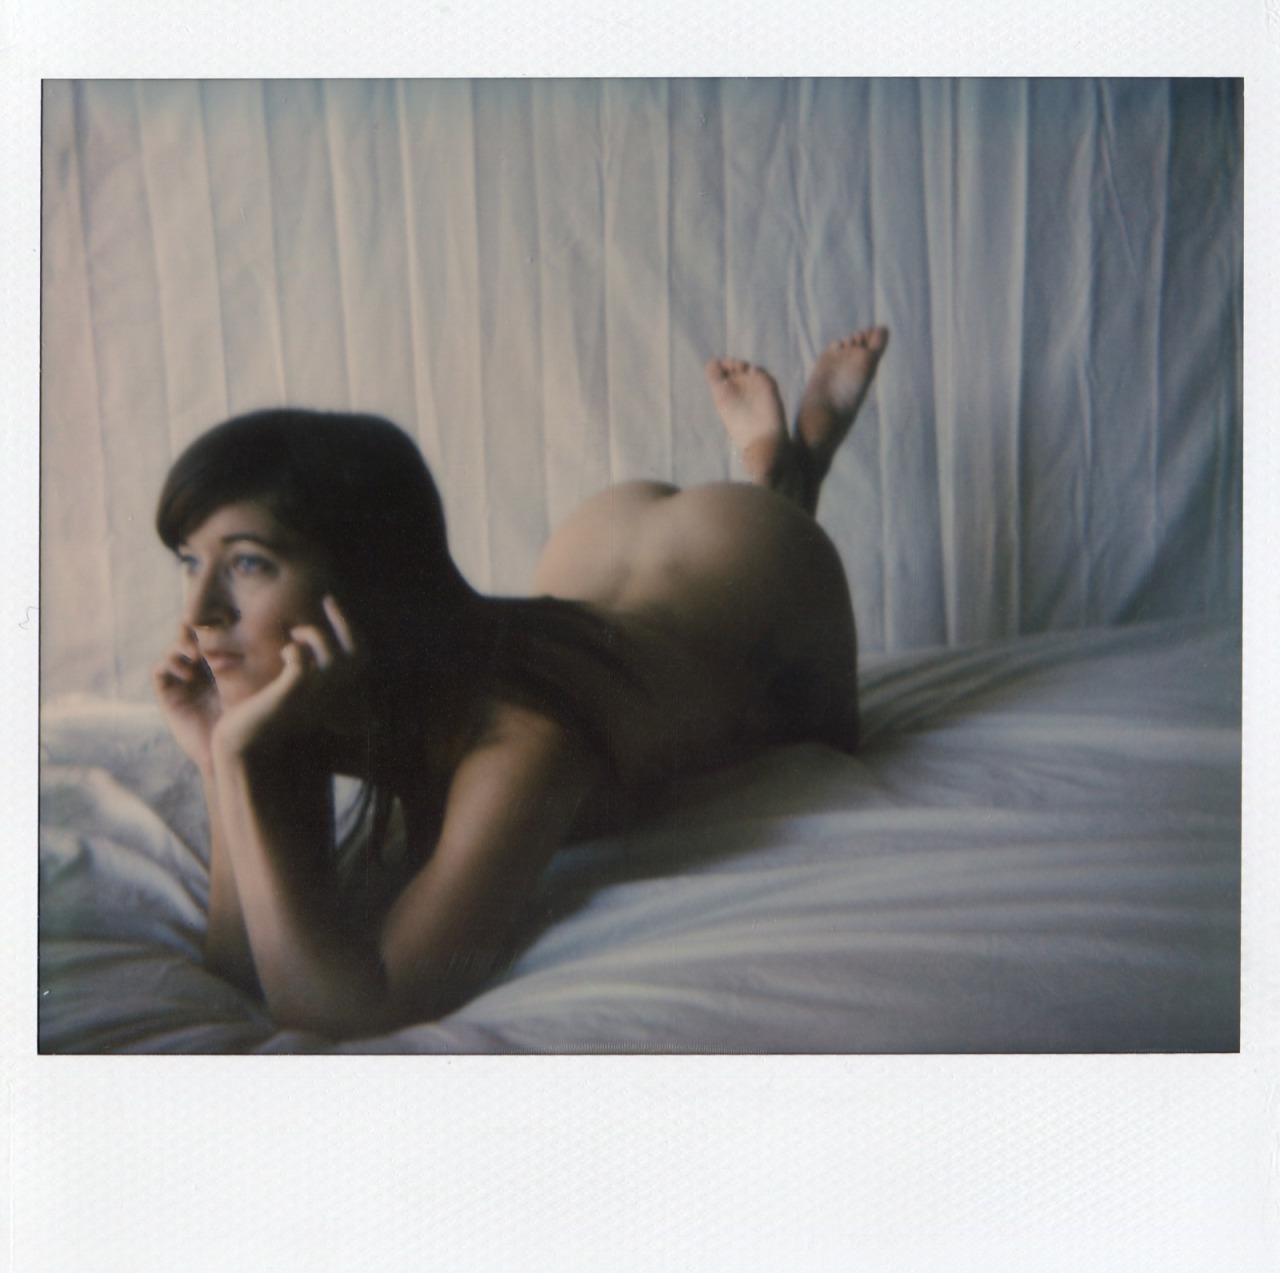 polabeard:  Model: Ivy Lee  spectra impossible project film. Shot by polabear.  